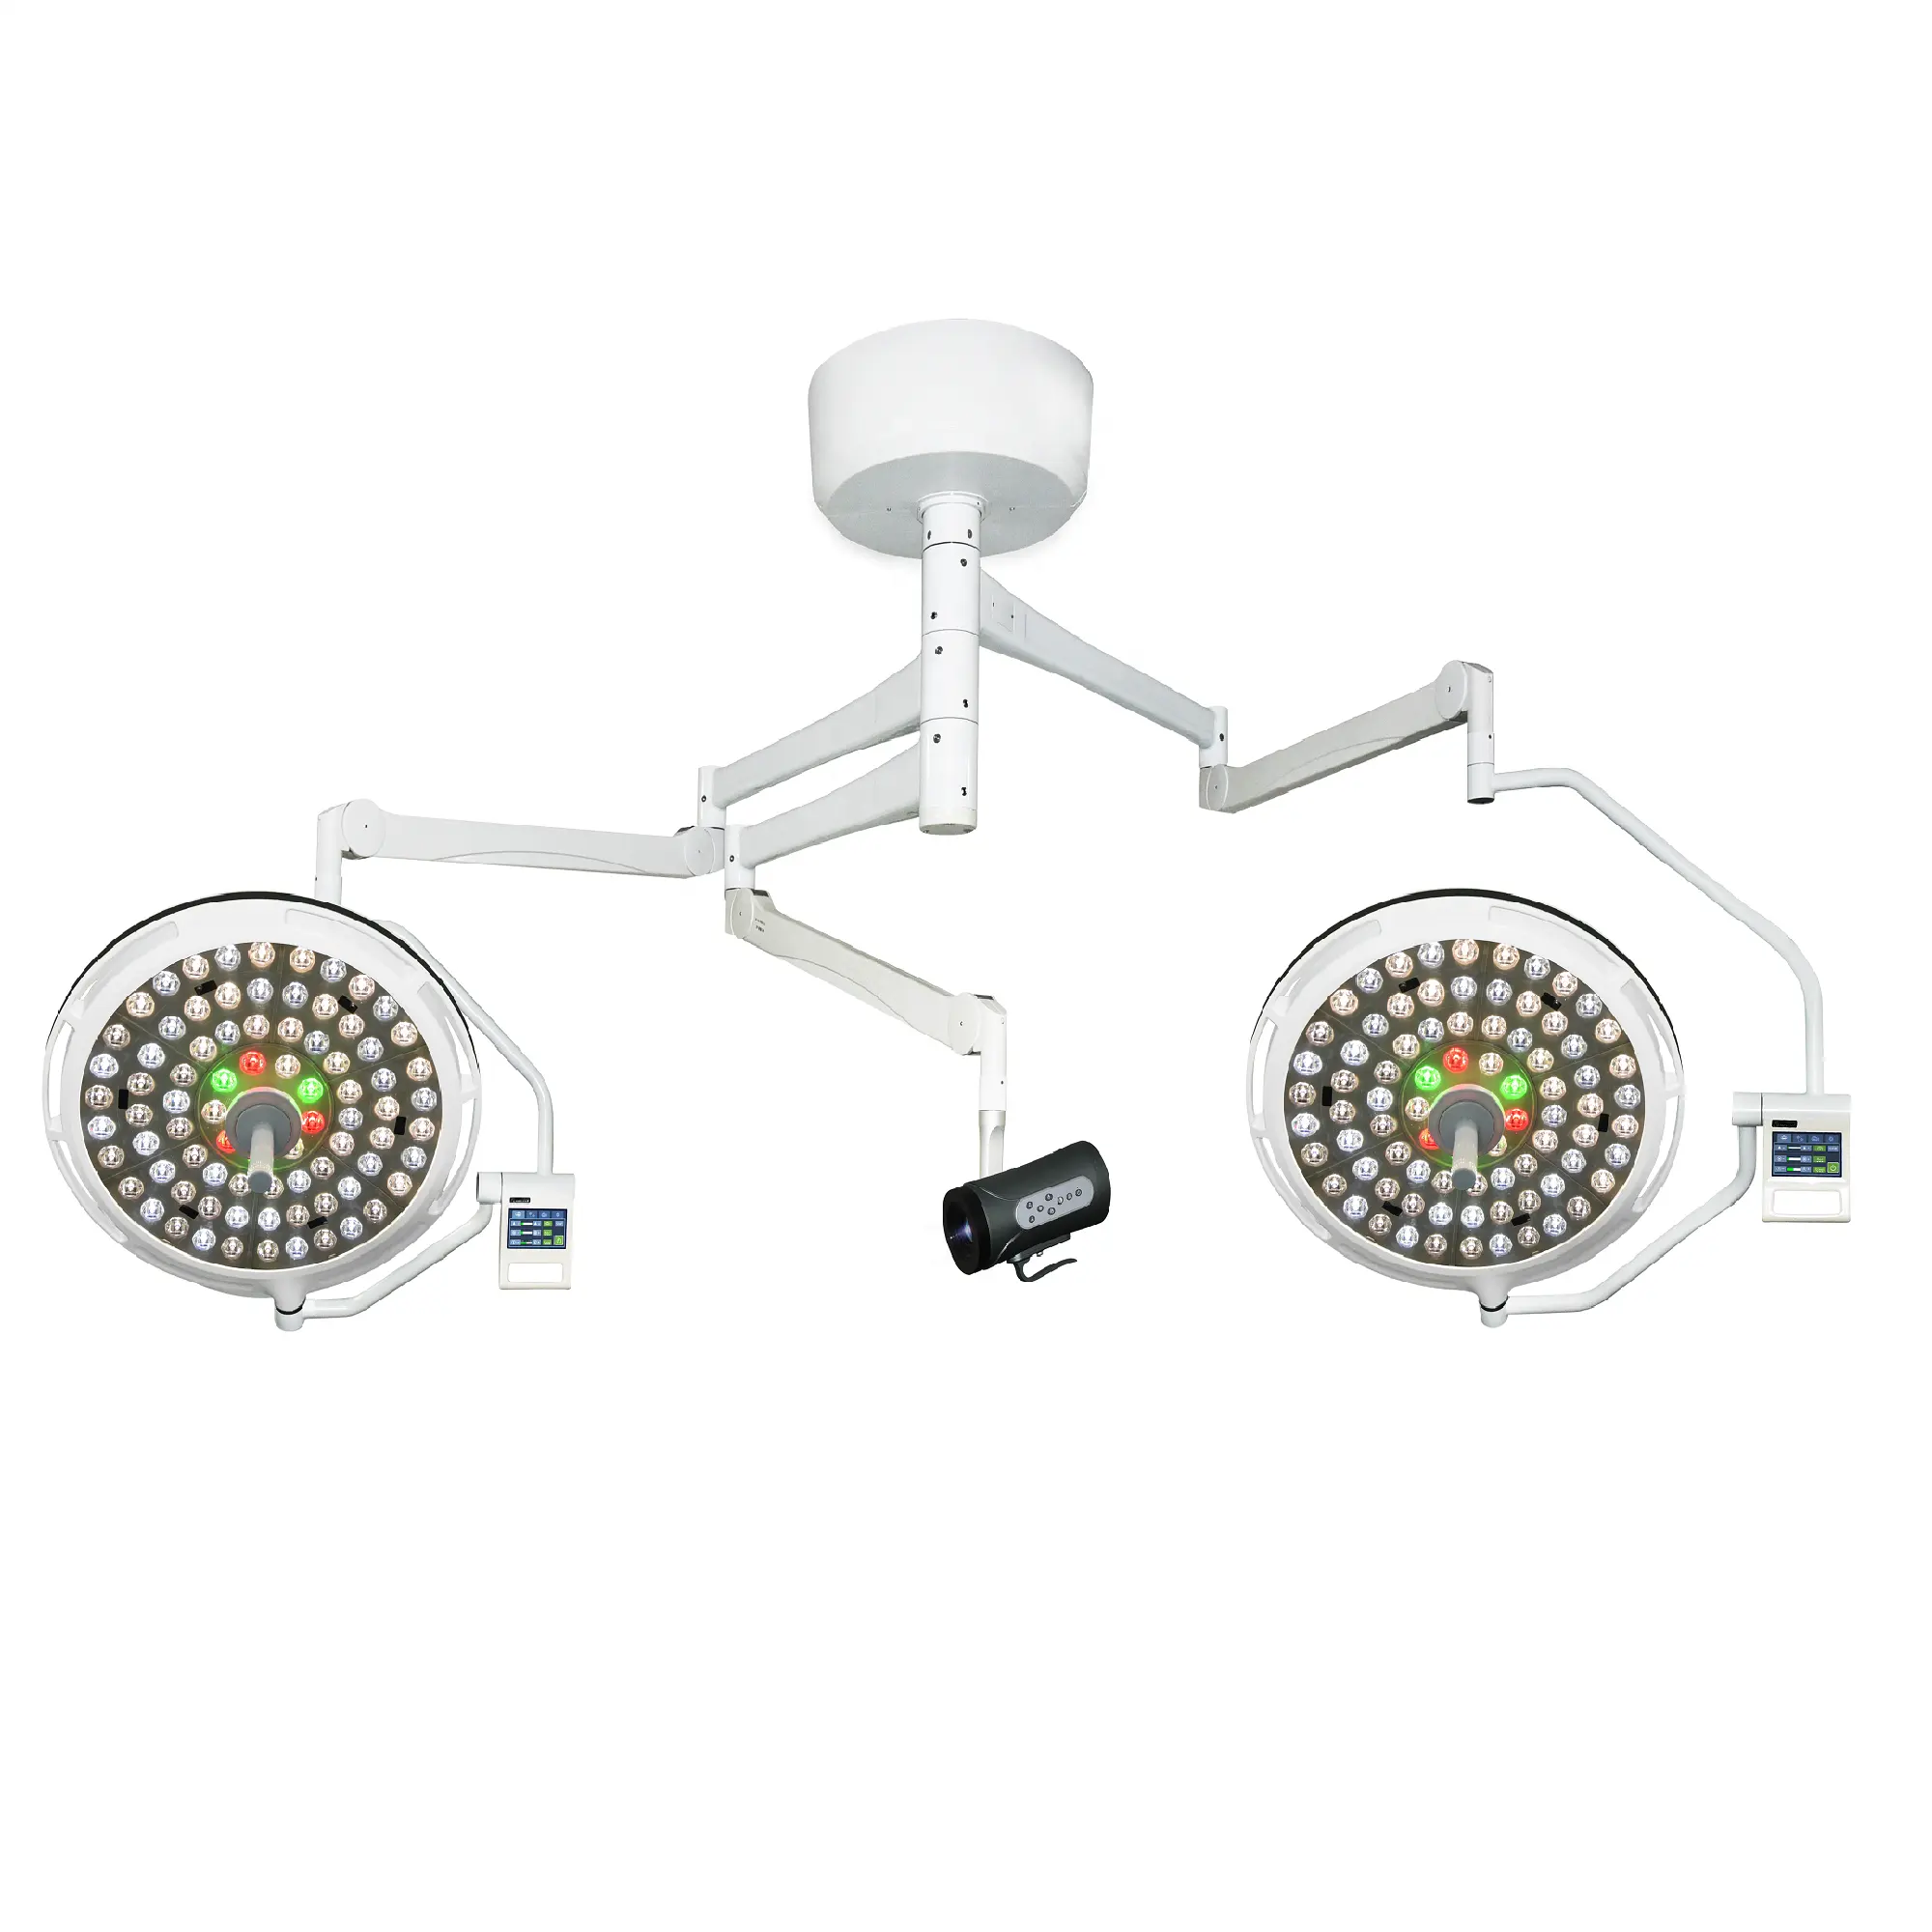 In Flower Med You can Find a Type LED Shadowless Lamp for Surgical Room